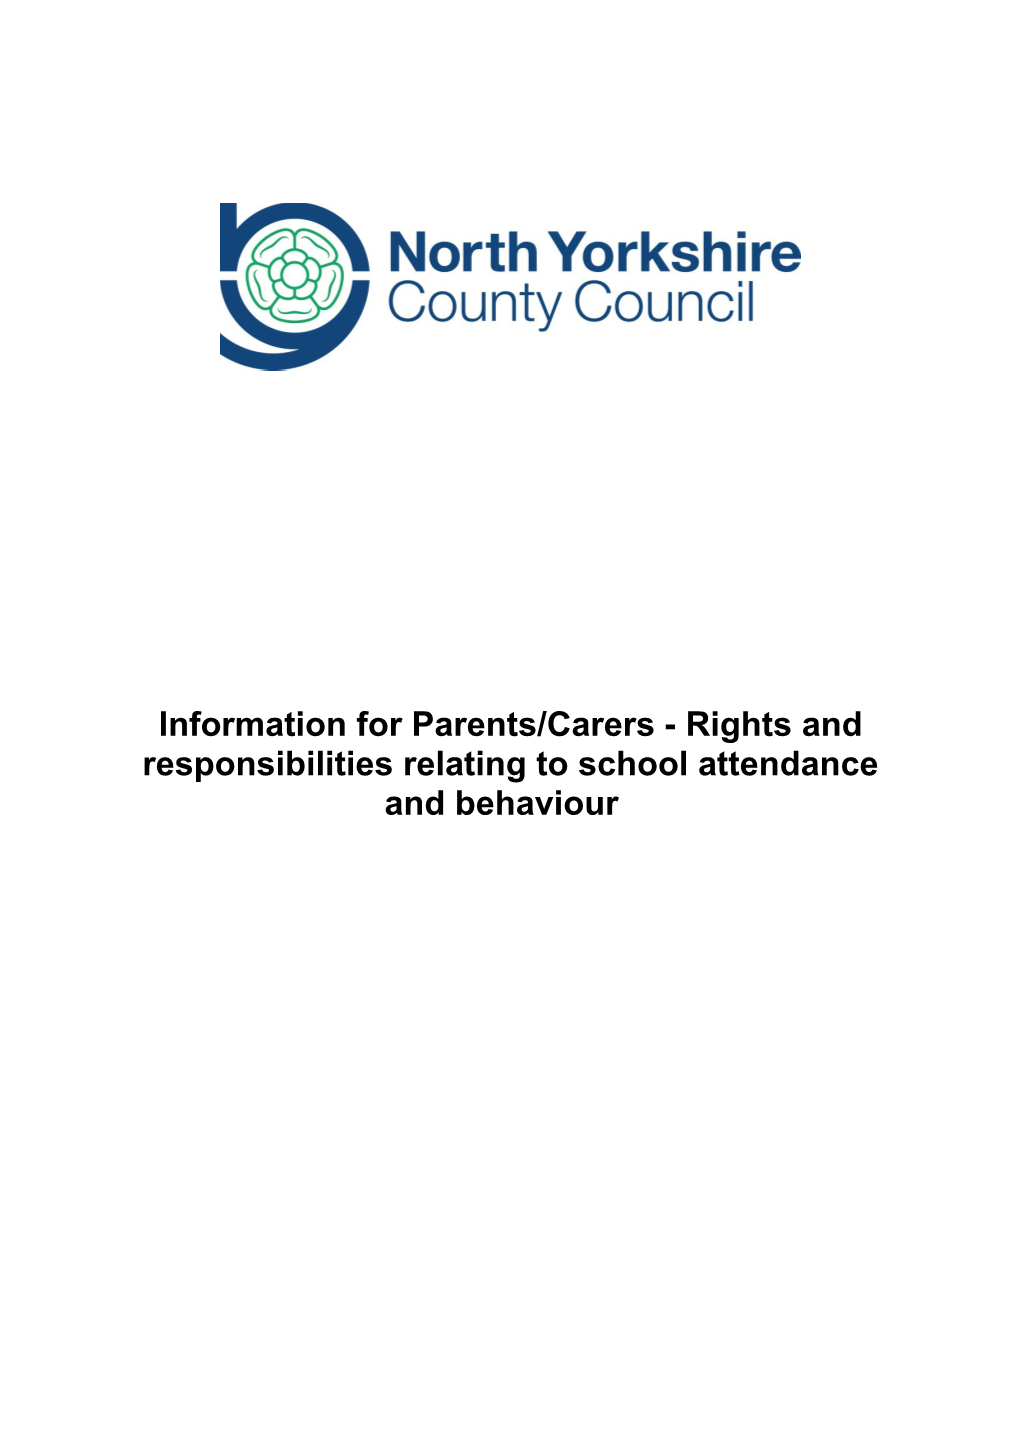 Information for Parents/Carers - Rights and Responsibilities Relating to School Attendance